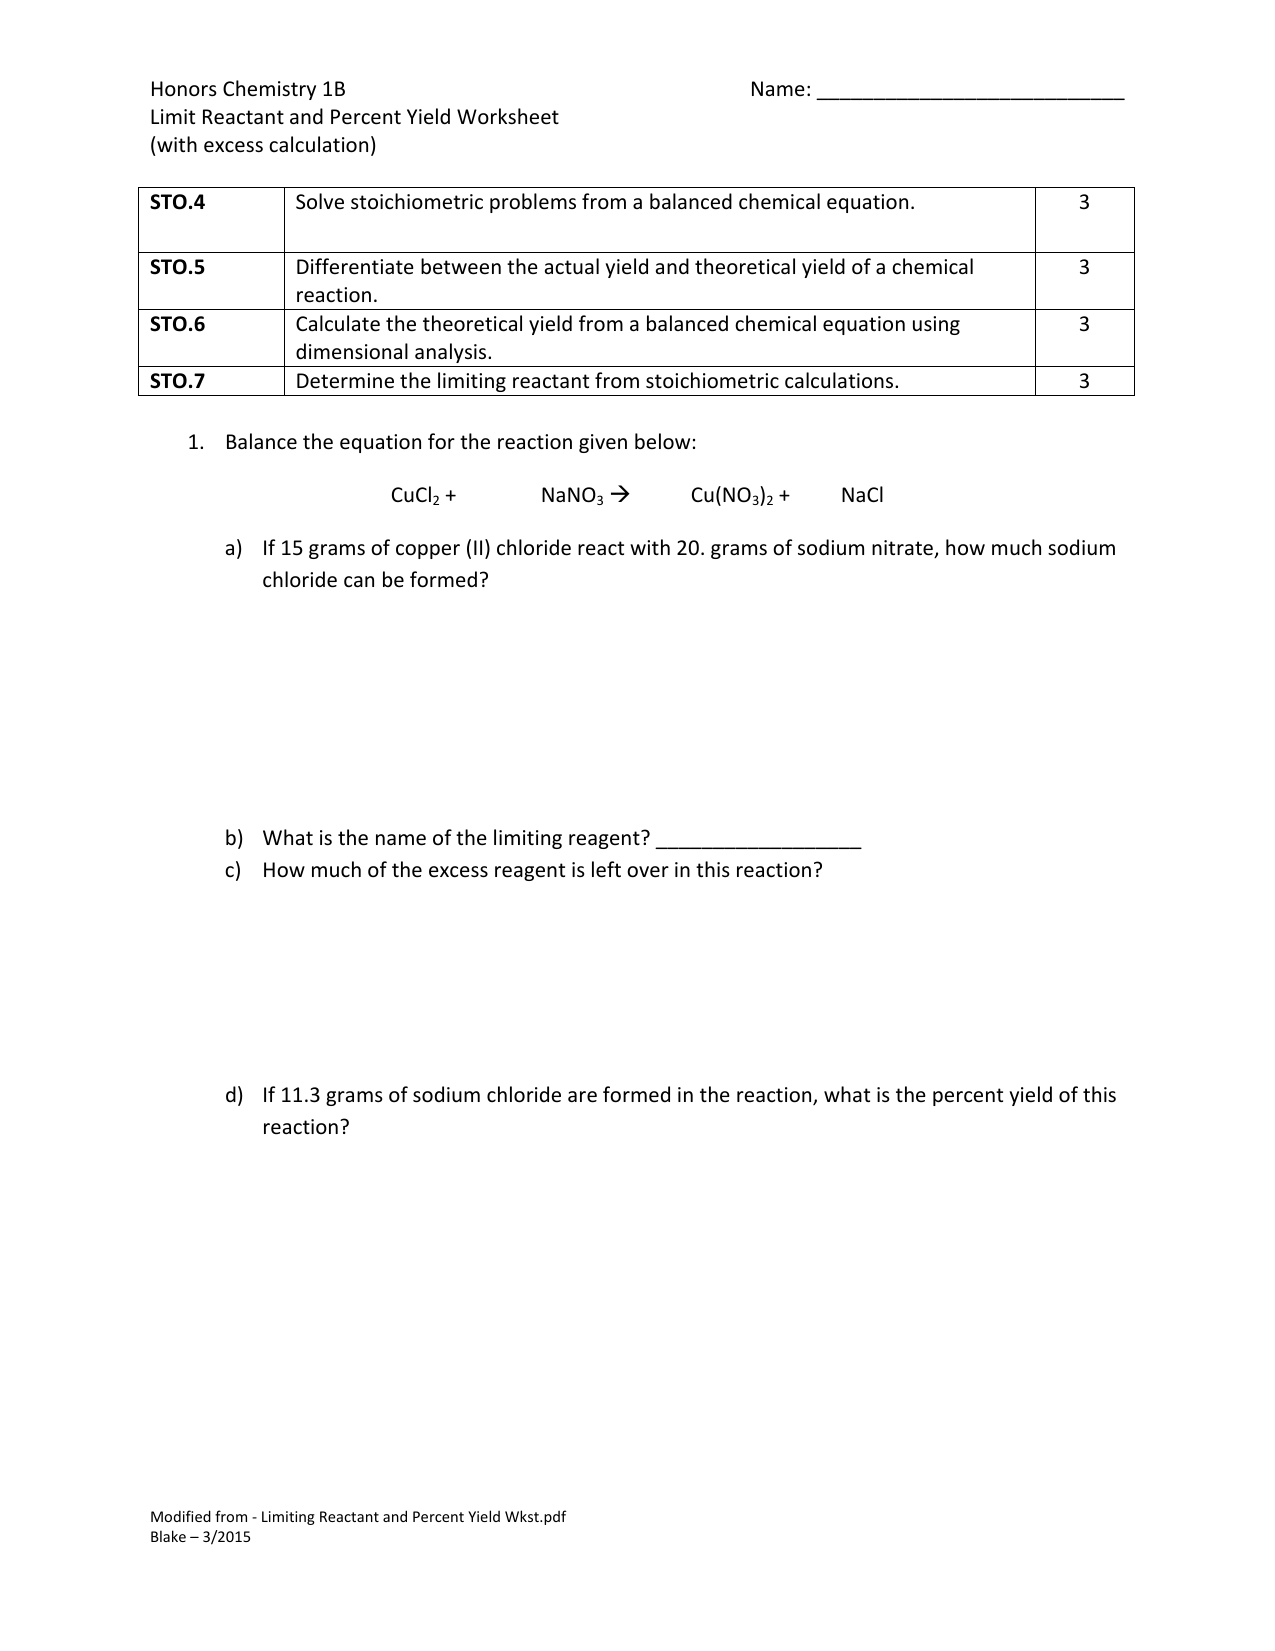 limiting-reactant-and-percent-yield-worksheet-with-key